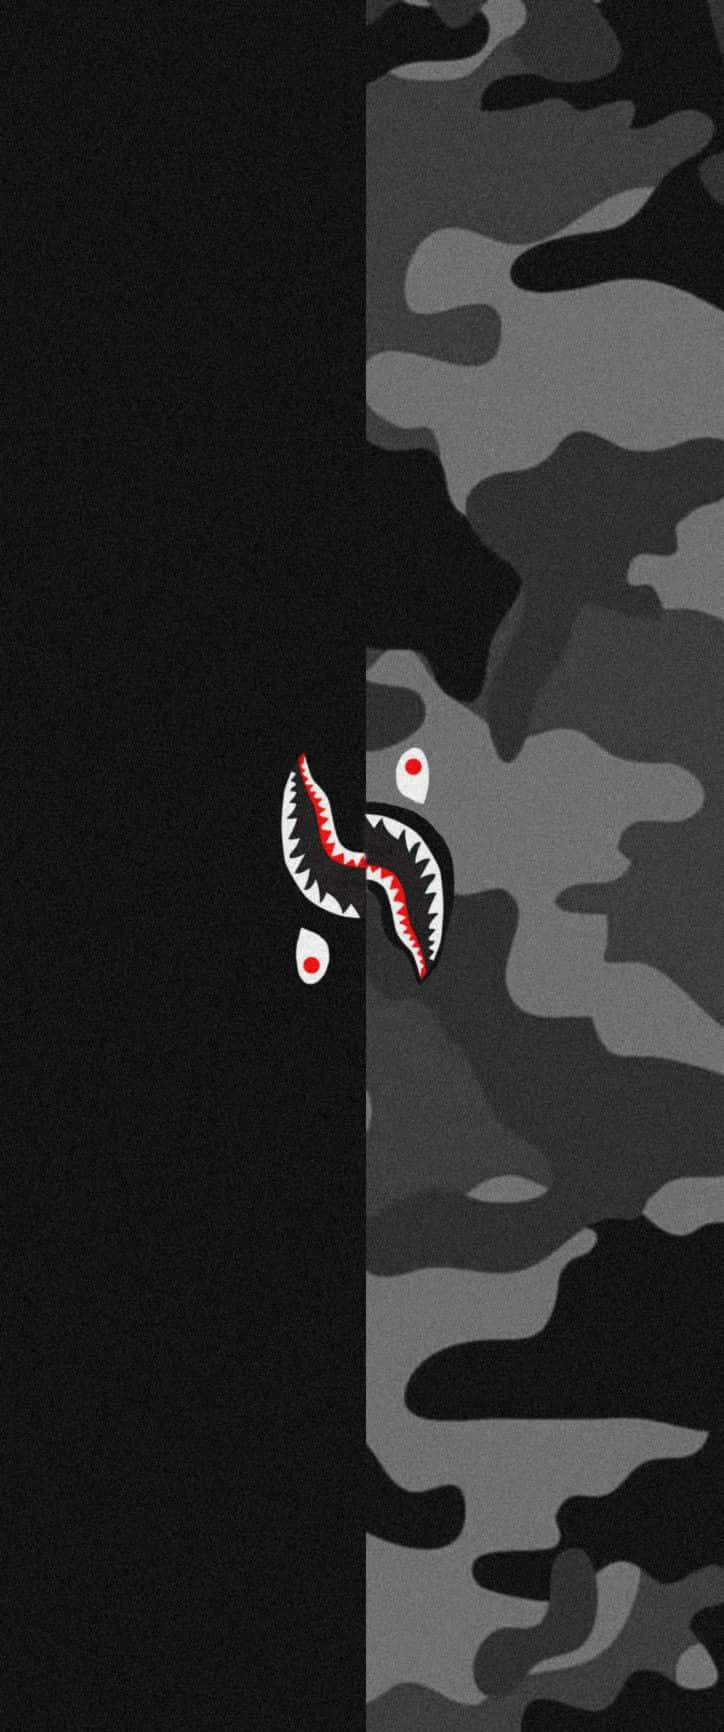 Look stylish and cool with the new Bape iPhone 6 Wallpaper